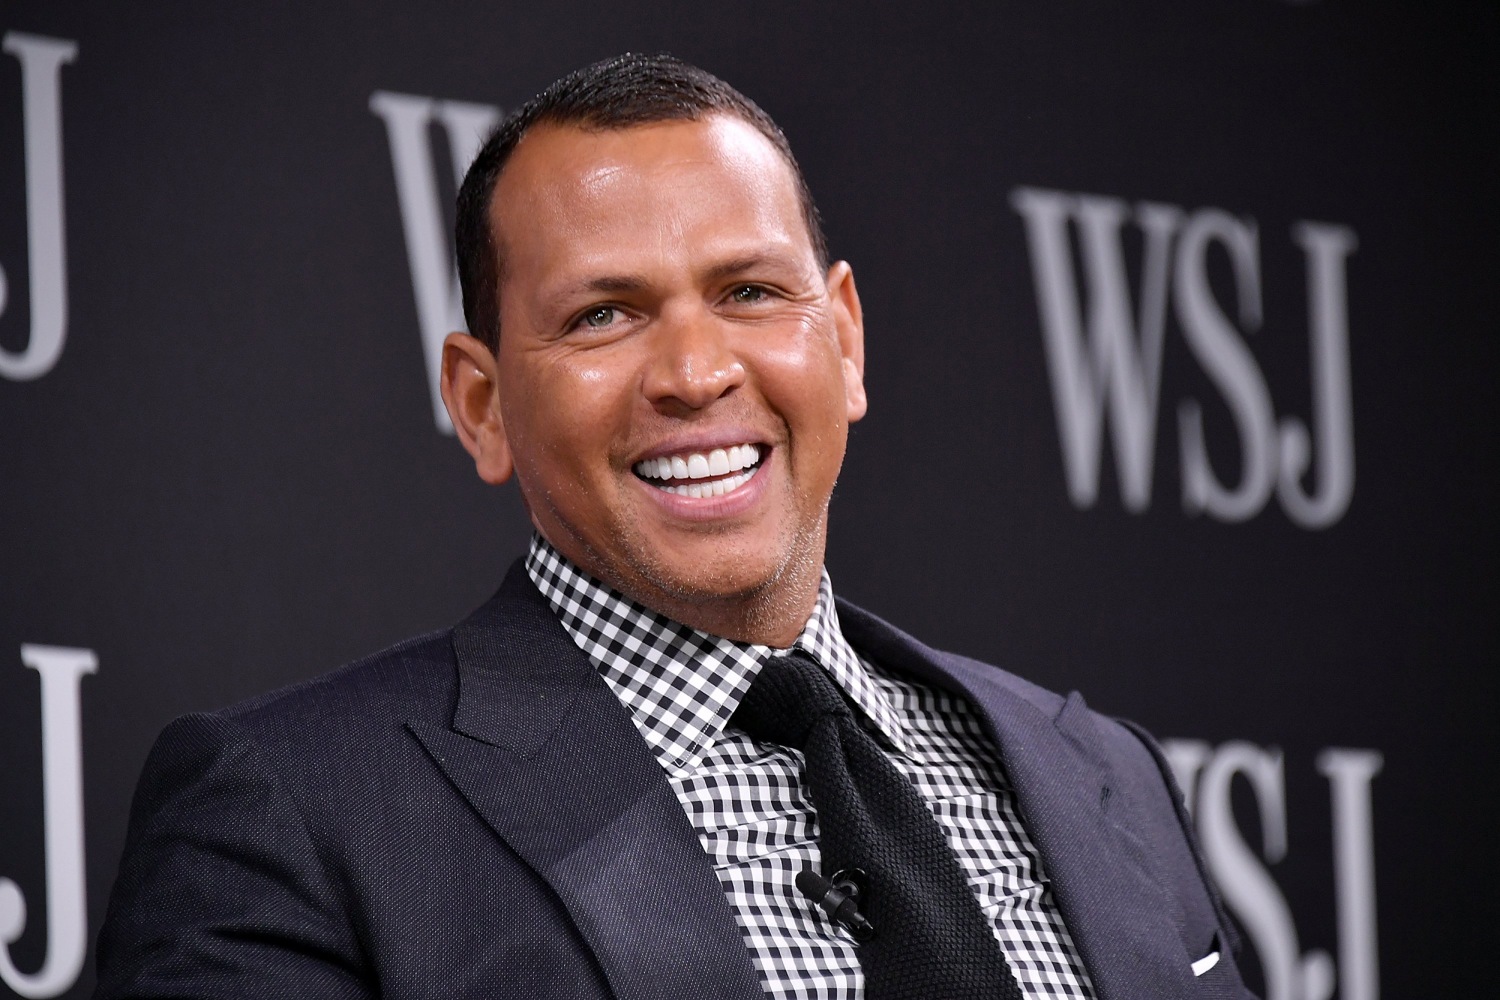 Alex Rodriguez's car was robbed shortly after Sunday Night